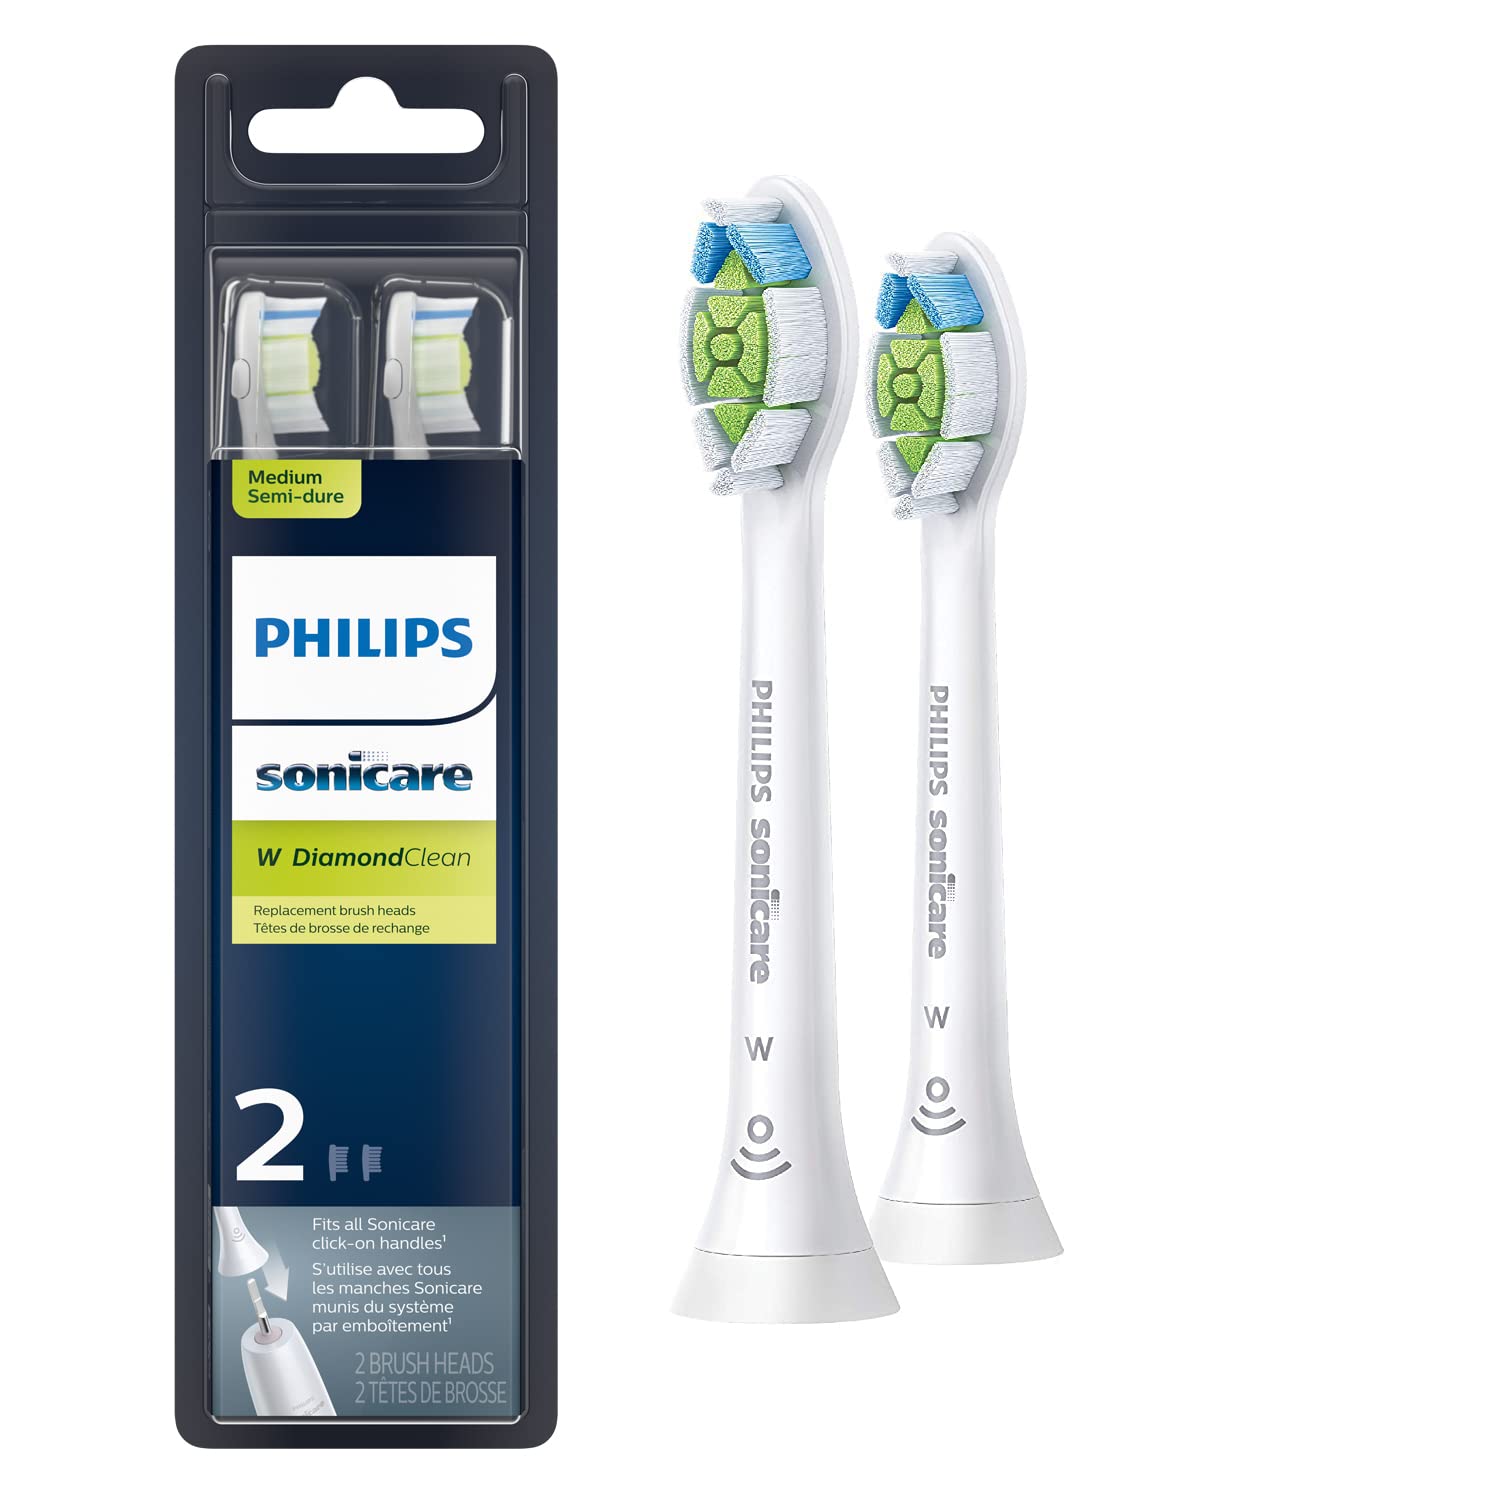 Philips Sonicare Genuine W DiamondClean Replacement Toothbrush Heads, White, HX6062/65 - 2 Pack - Pro-Distributing